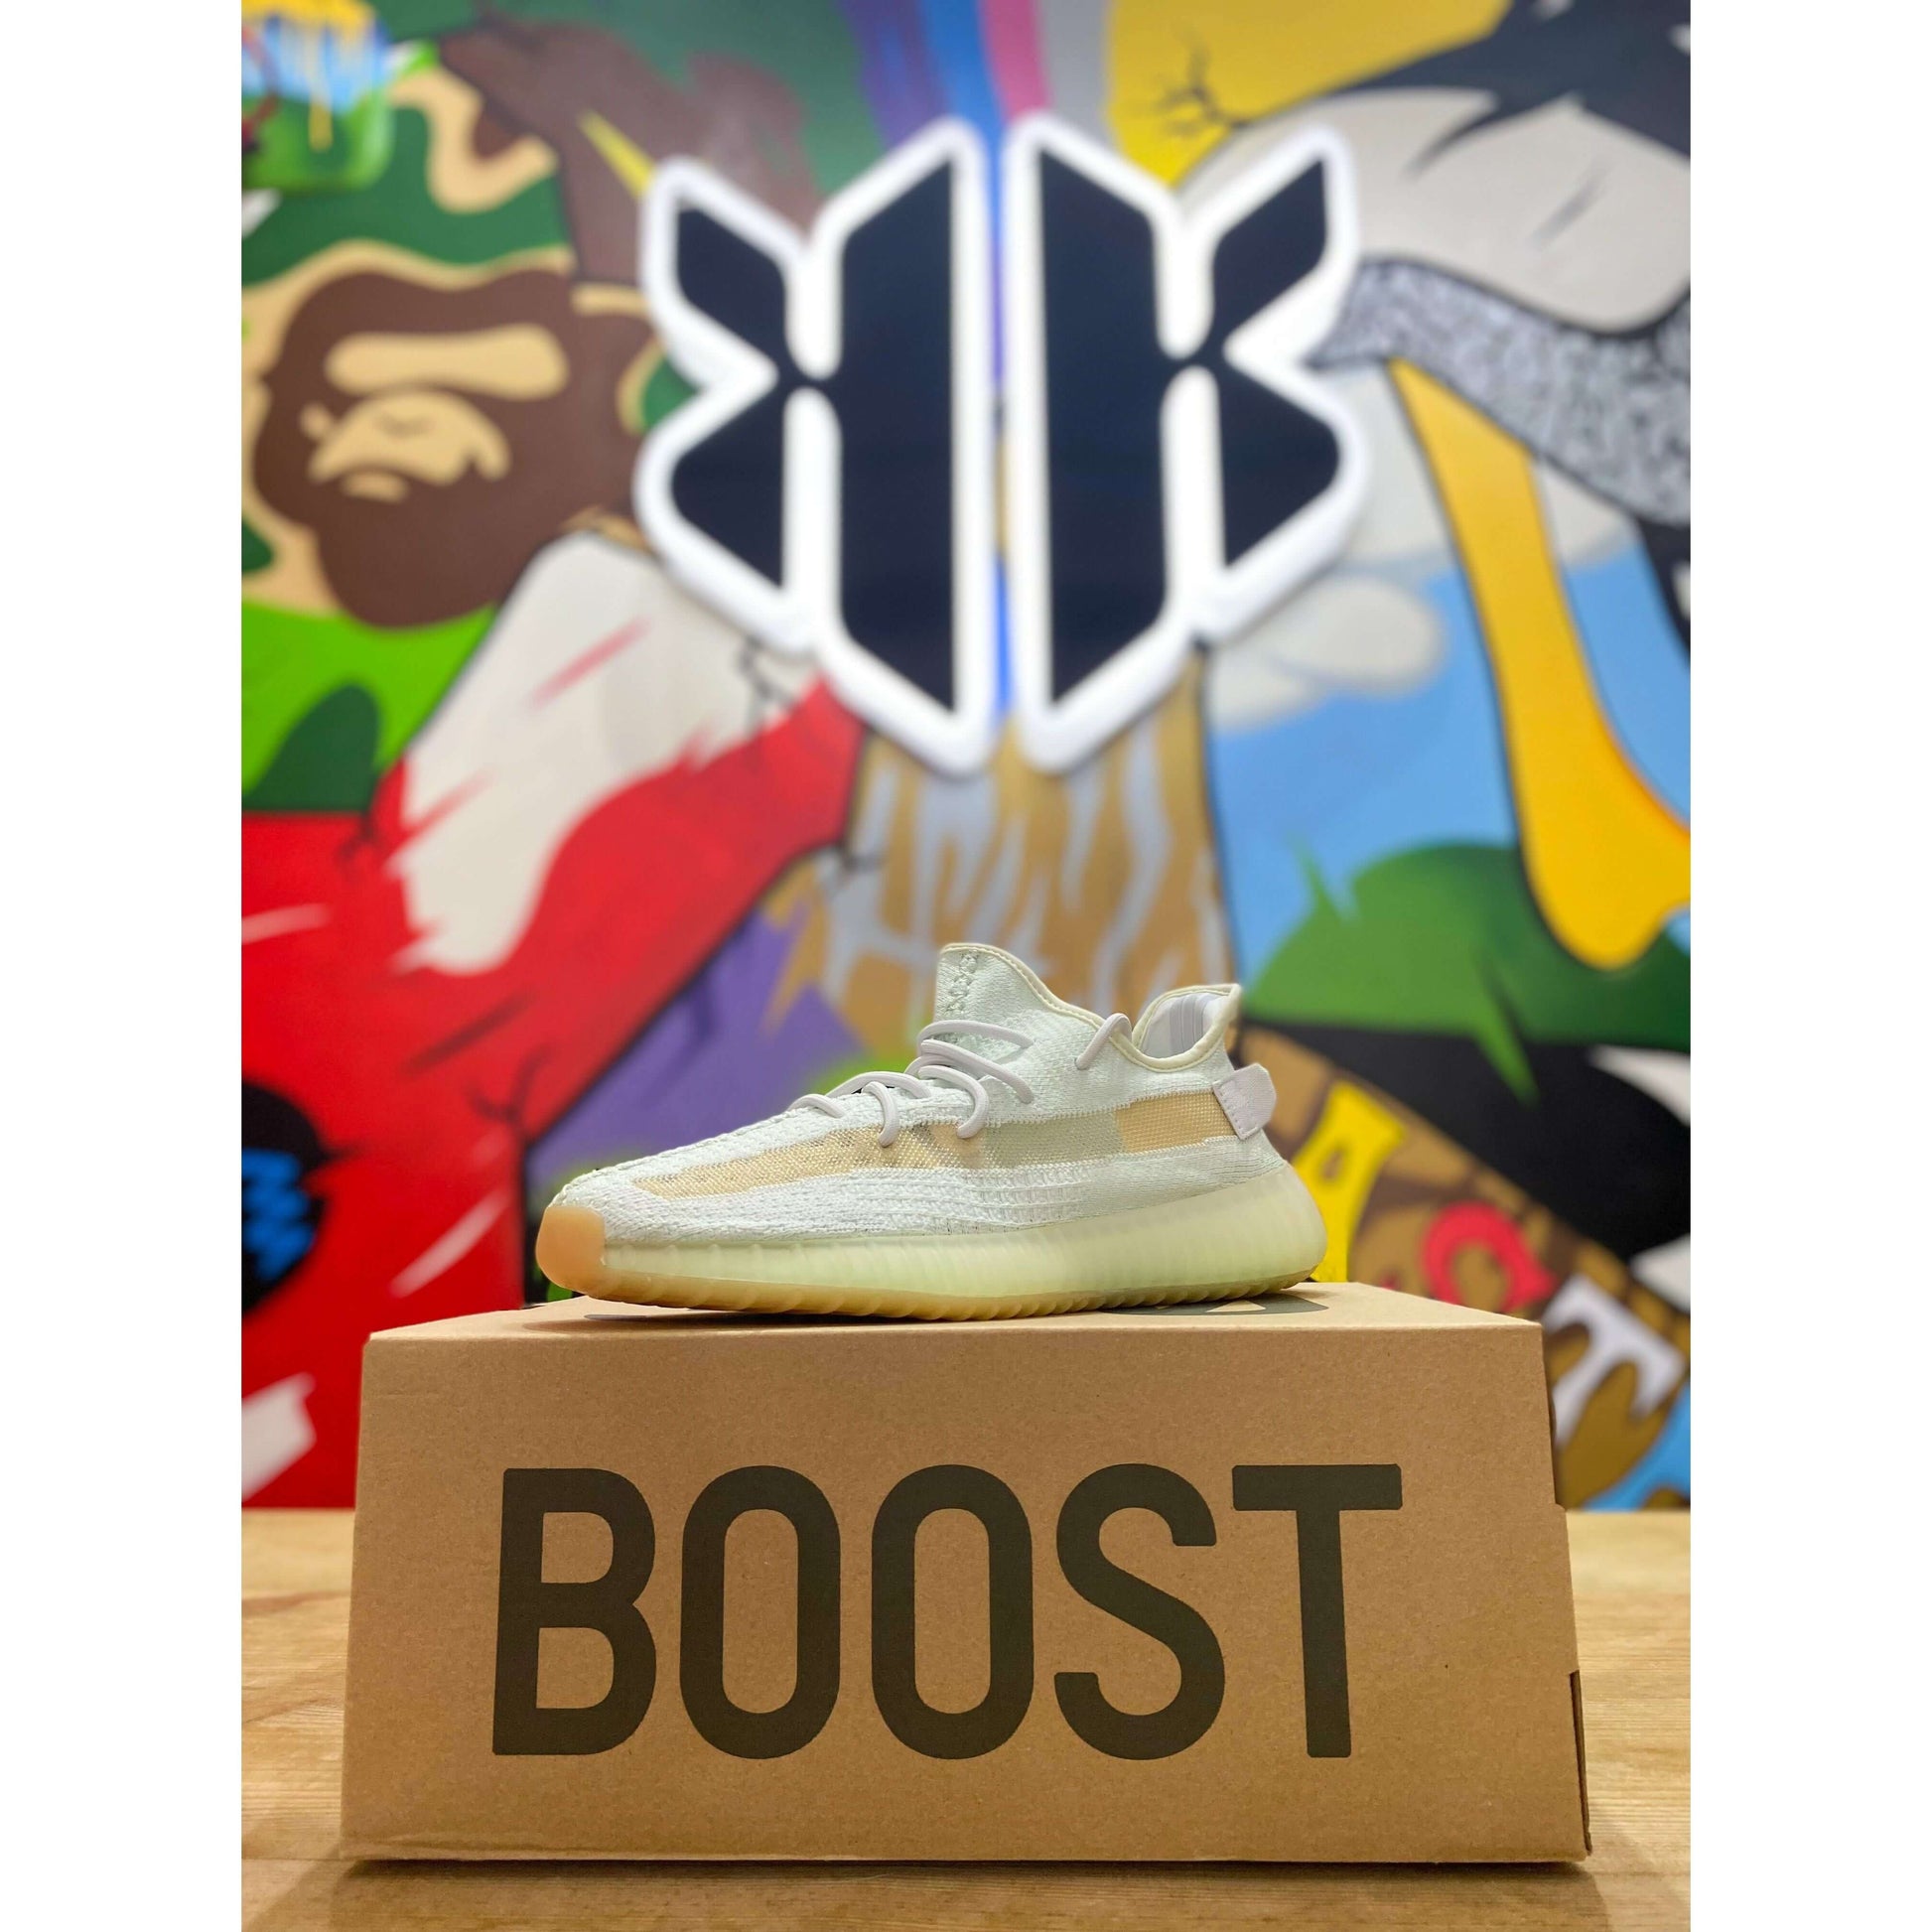 Adidas Yeezy Boost 350 V2 Hyperspace from Yeezy